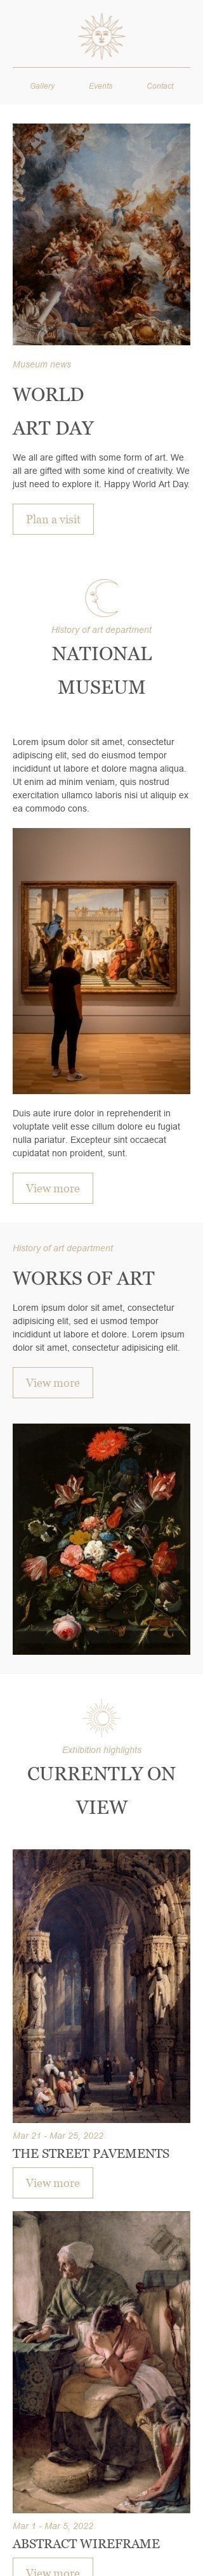 World Art Day Email Template "National Museum" for Art Gallery industry mobile view